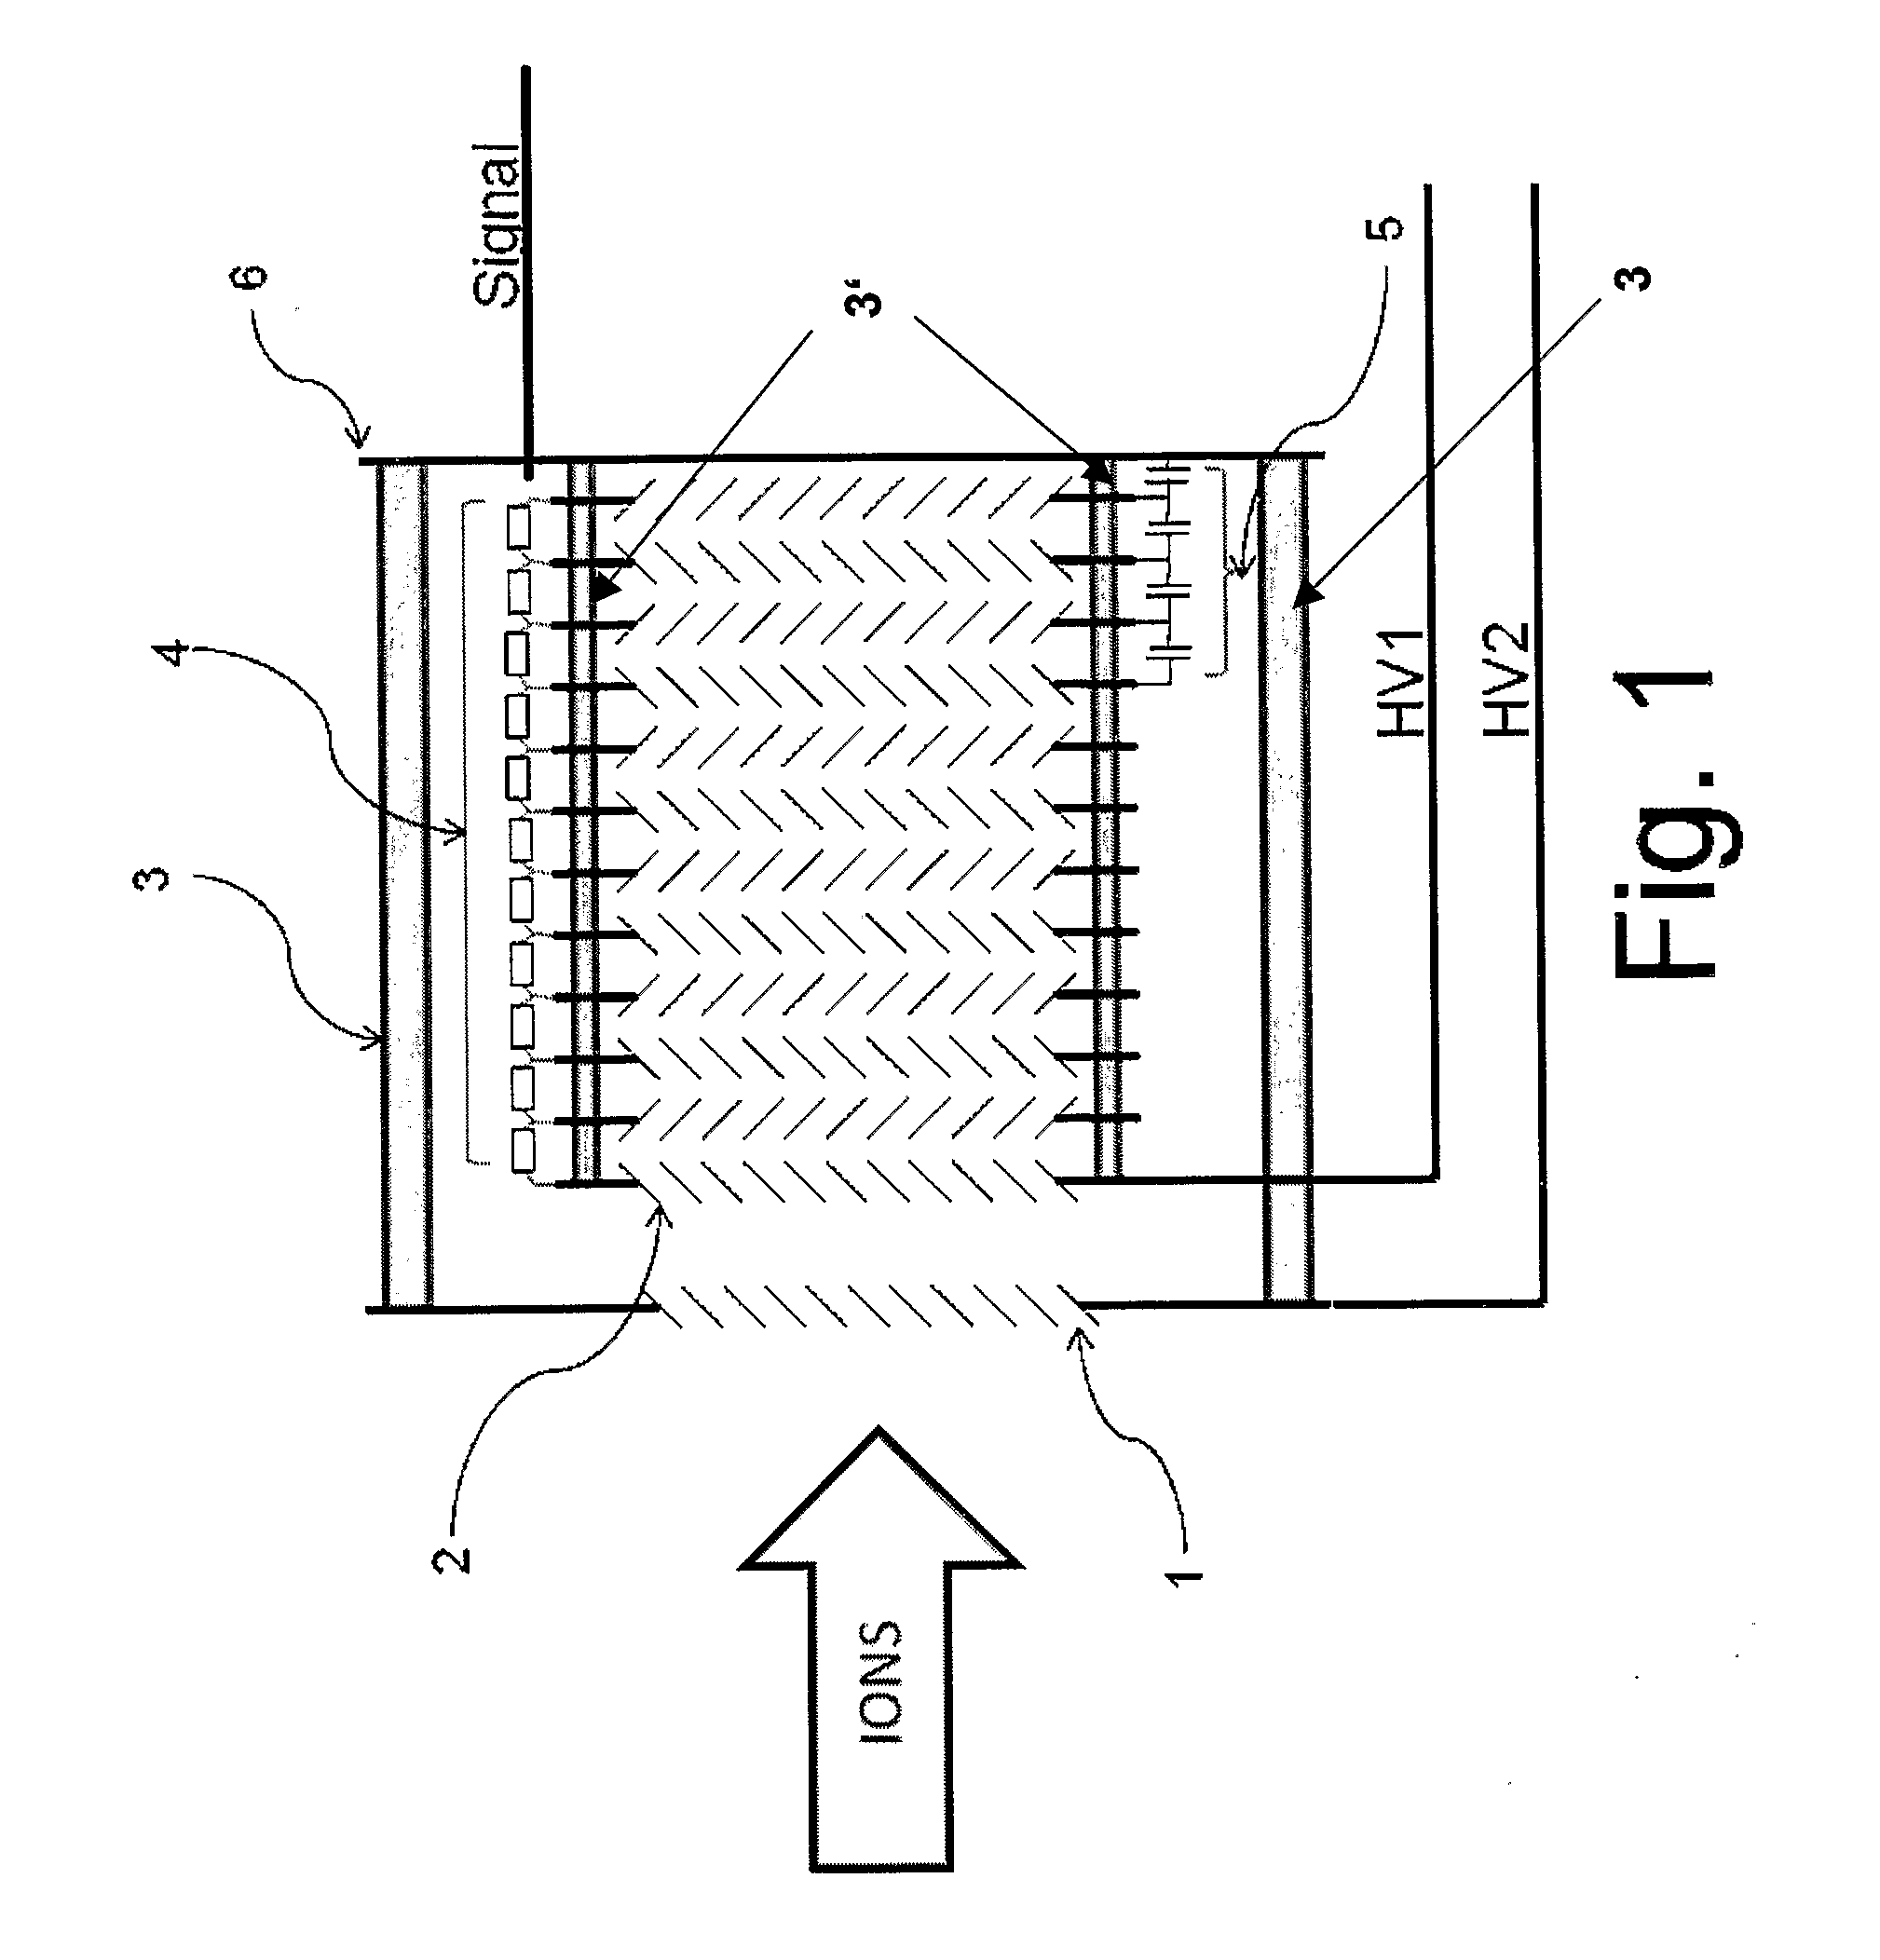 Detector device for high mass ion detection, a method for analyzing ions of high mass and a device for selection between ion detectors